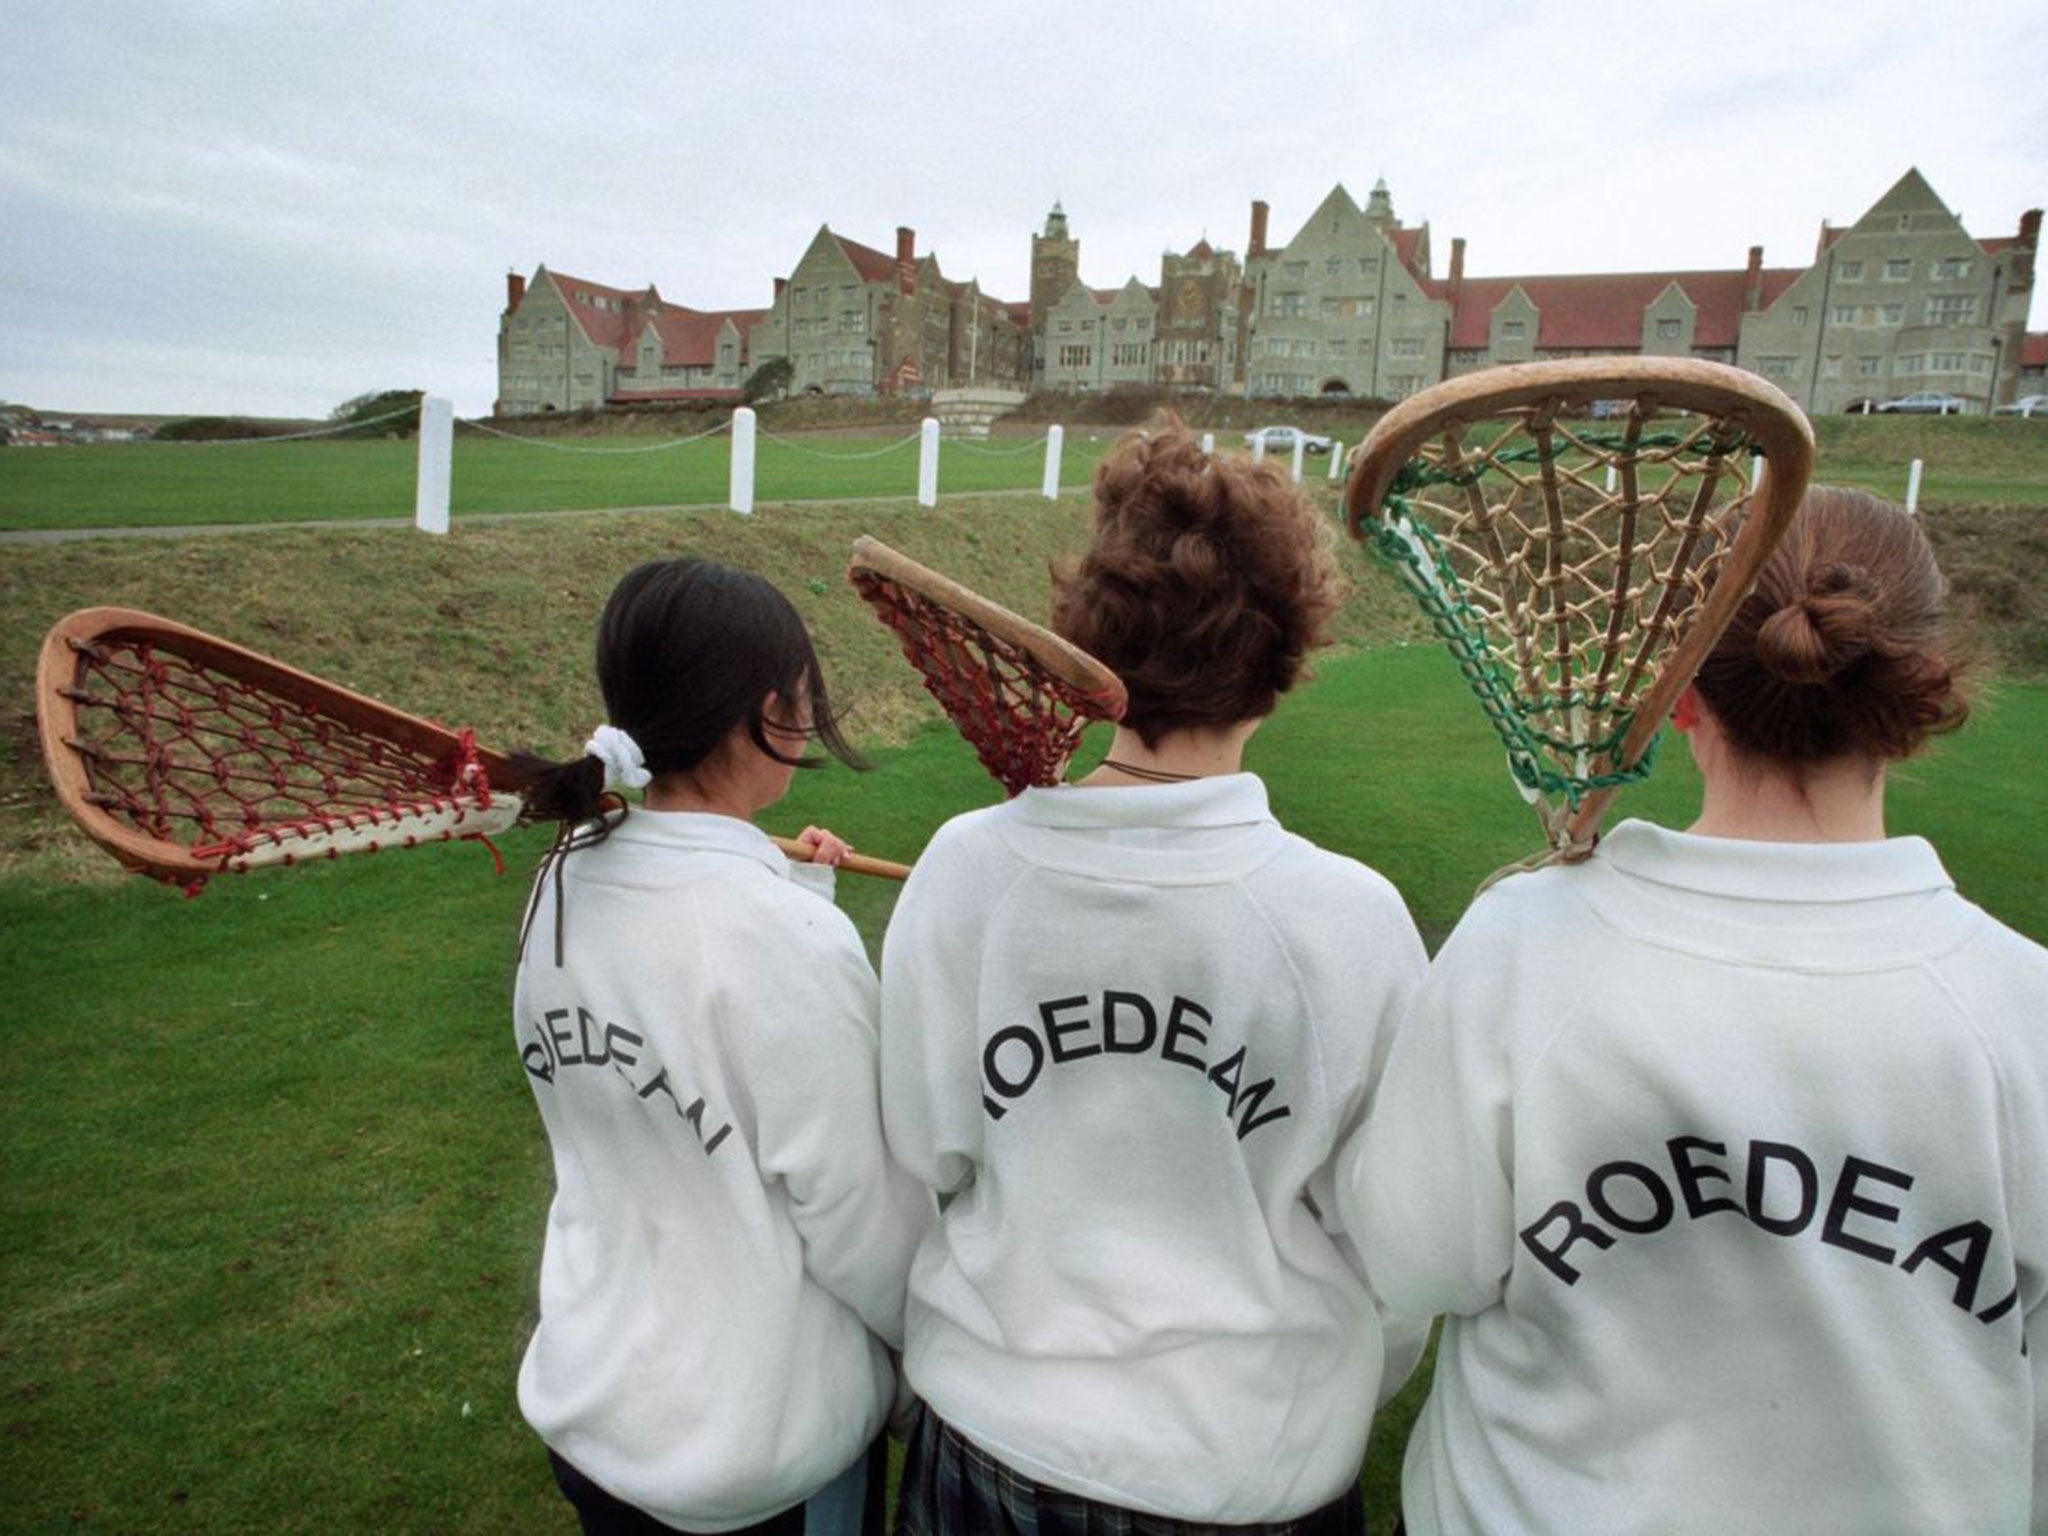 Sticky subject: Why should the social and economic benefits of being a Roedean girl be denied children from poorer homes?